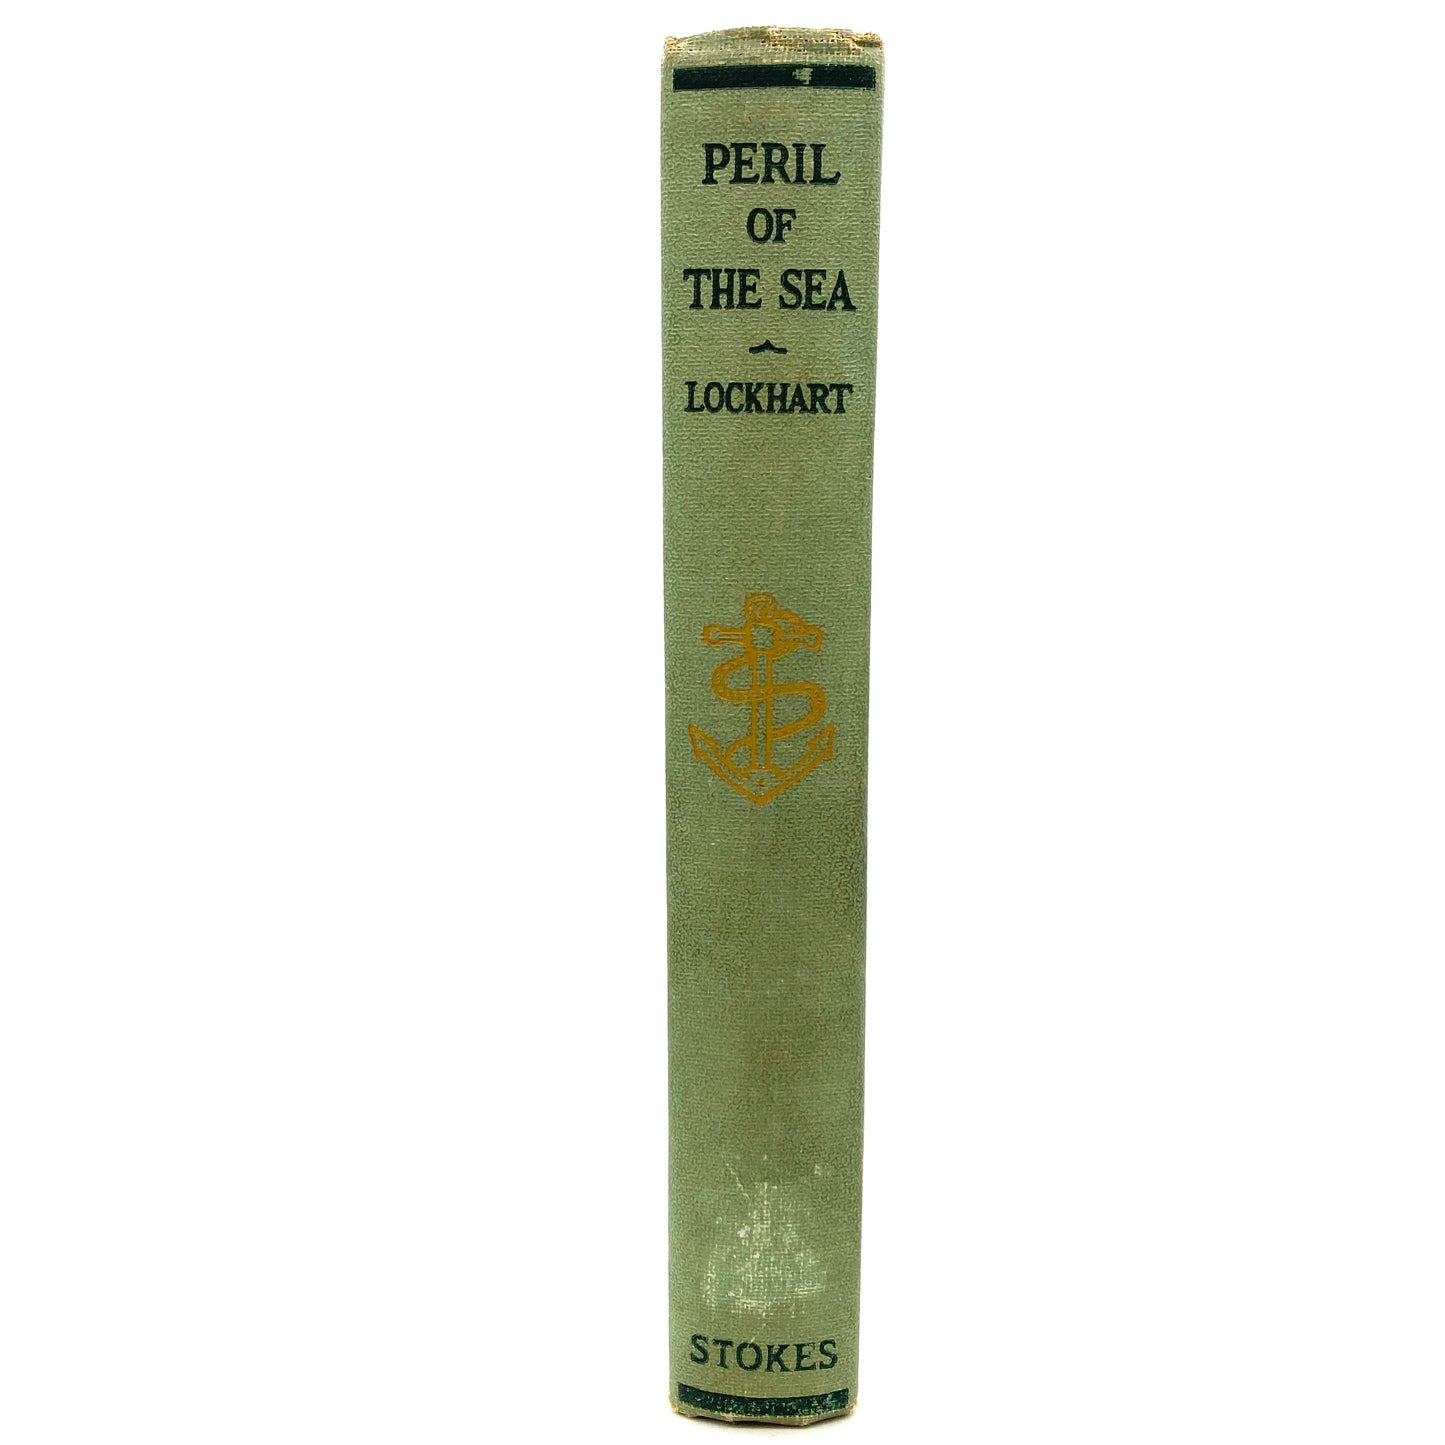 LOCKHART, J.G. "Peril of the Sea" [Frederick A. Stokes, n.d./c1924]